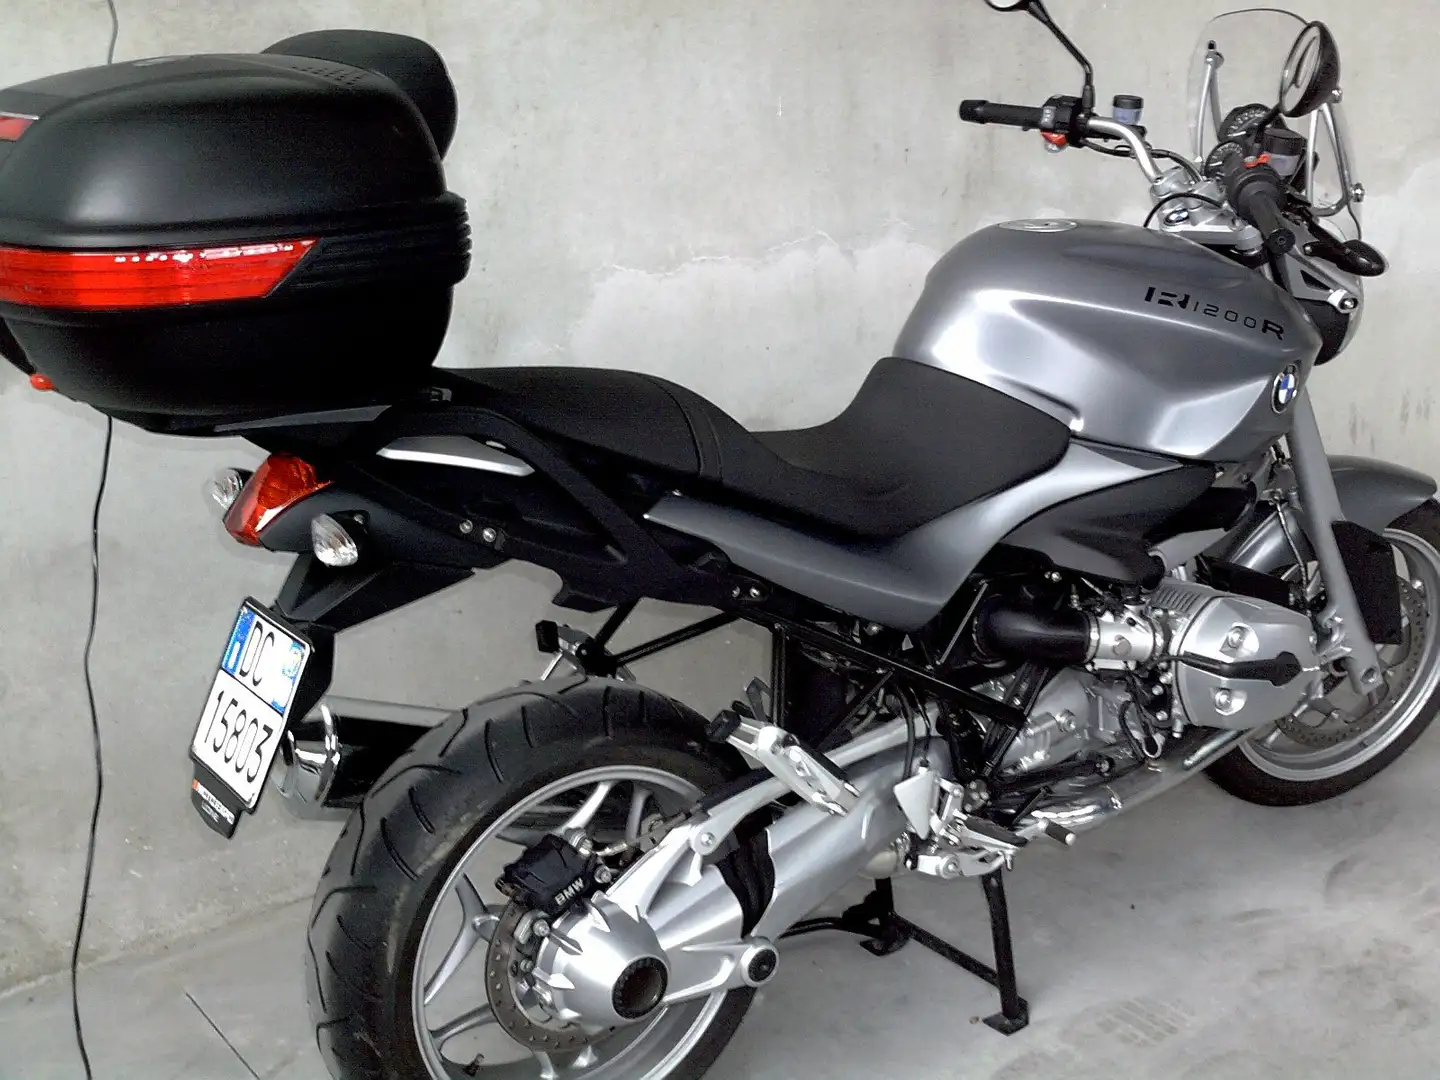 BMW R 1200 R 2006 - 2011 ABS siva - 2